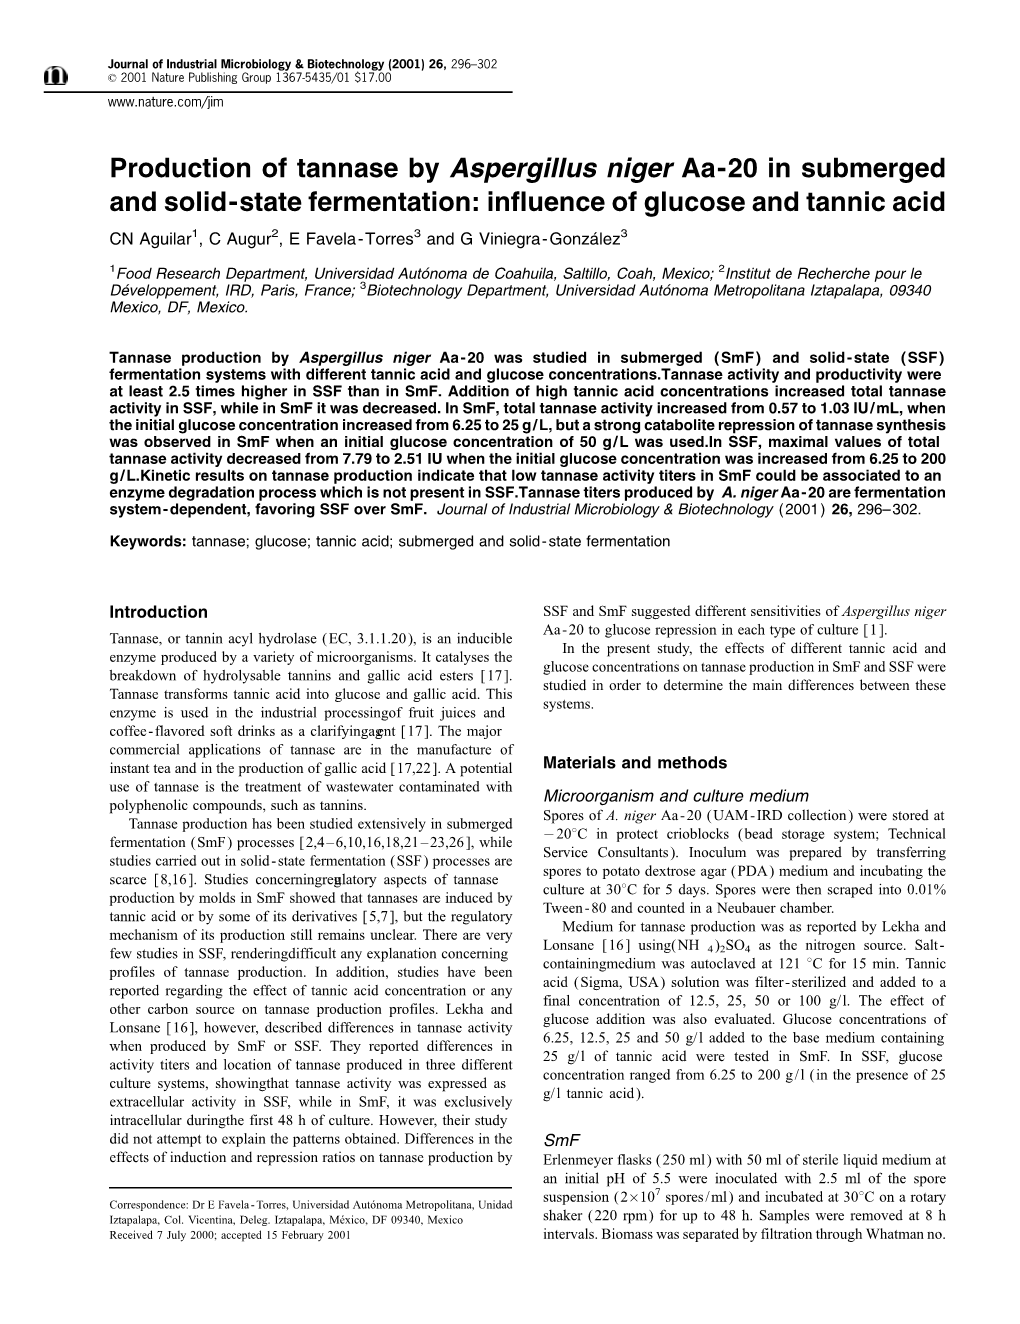 Production of Tannase by Aspergillus Niger Aa-20 in Submerged and Solid